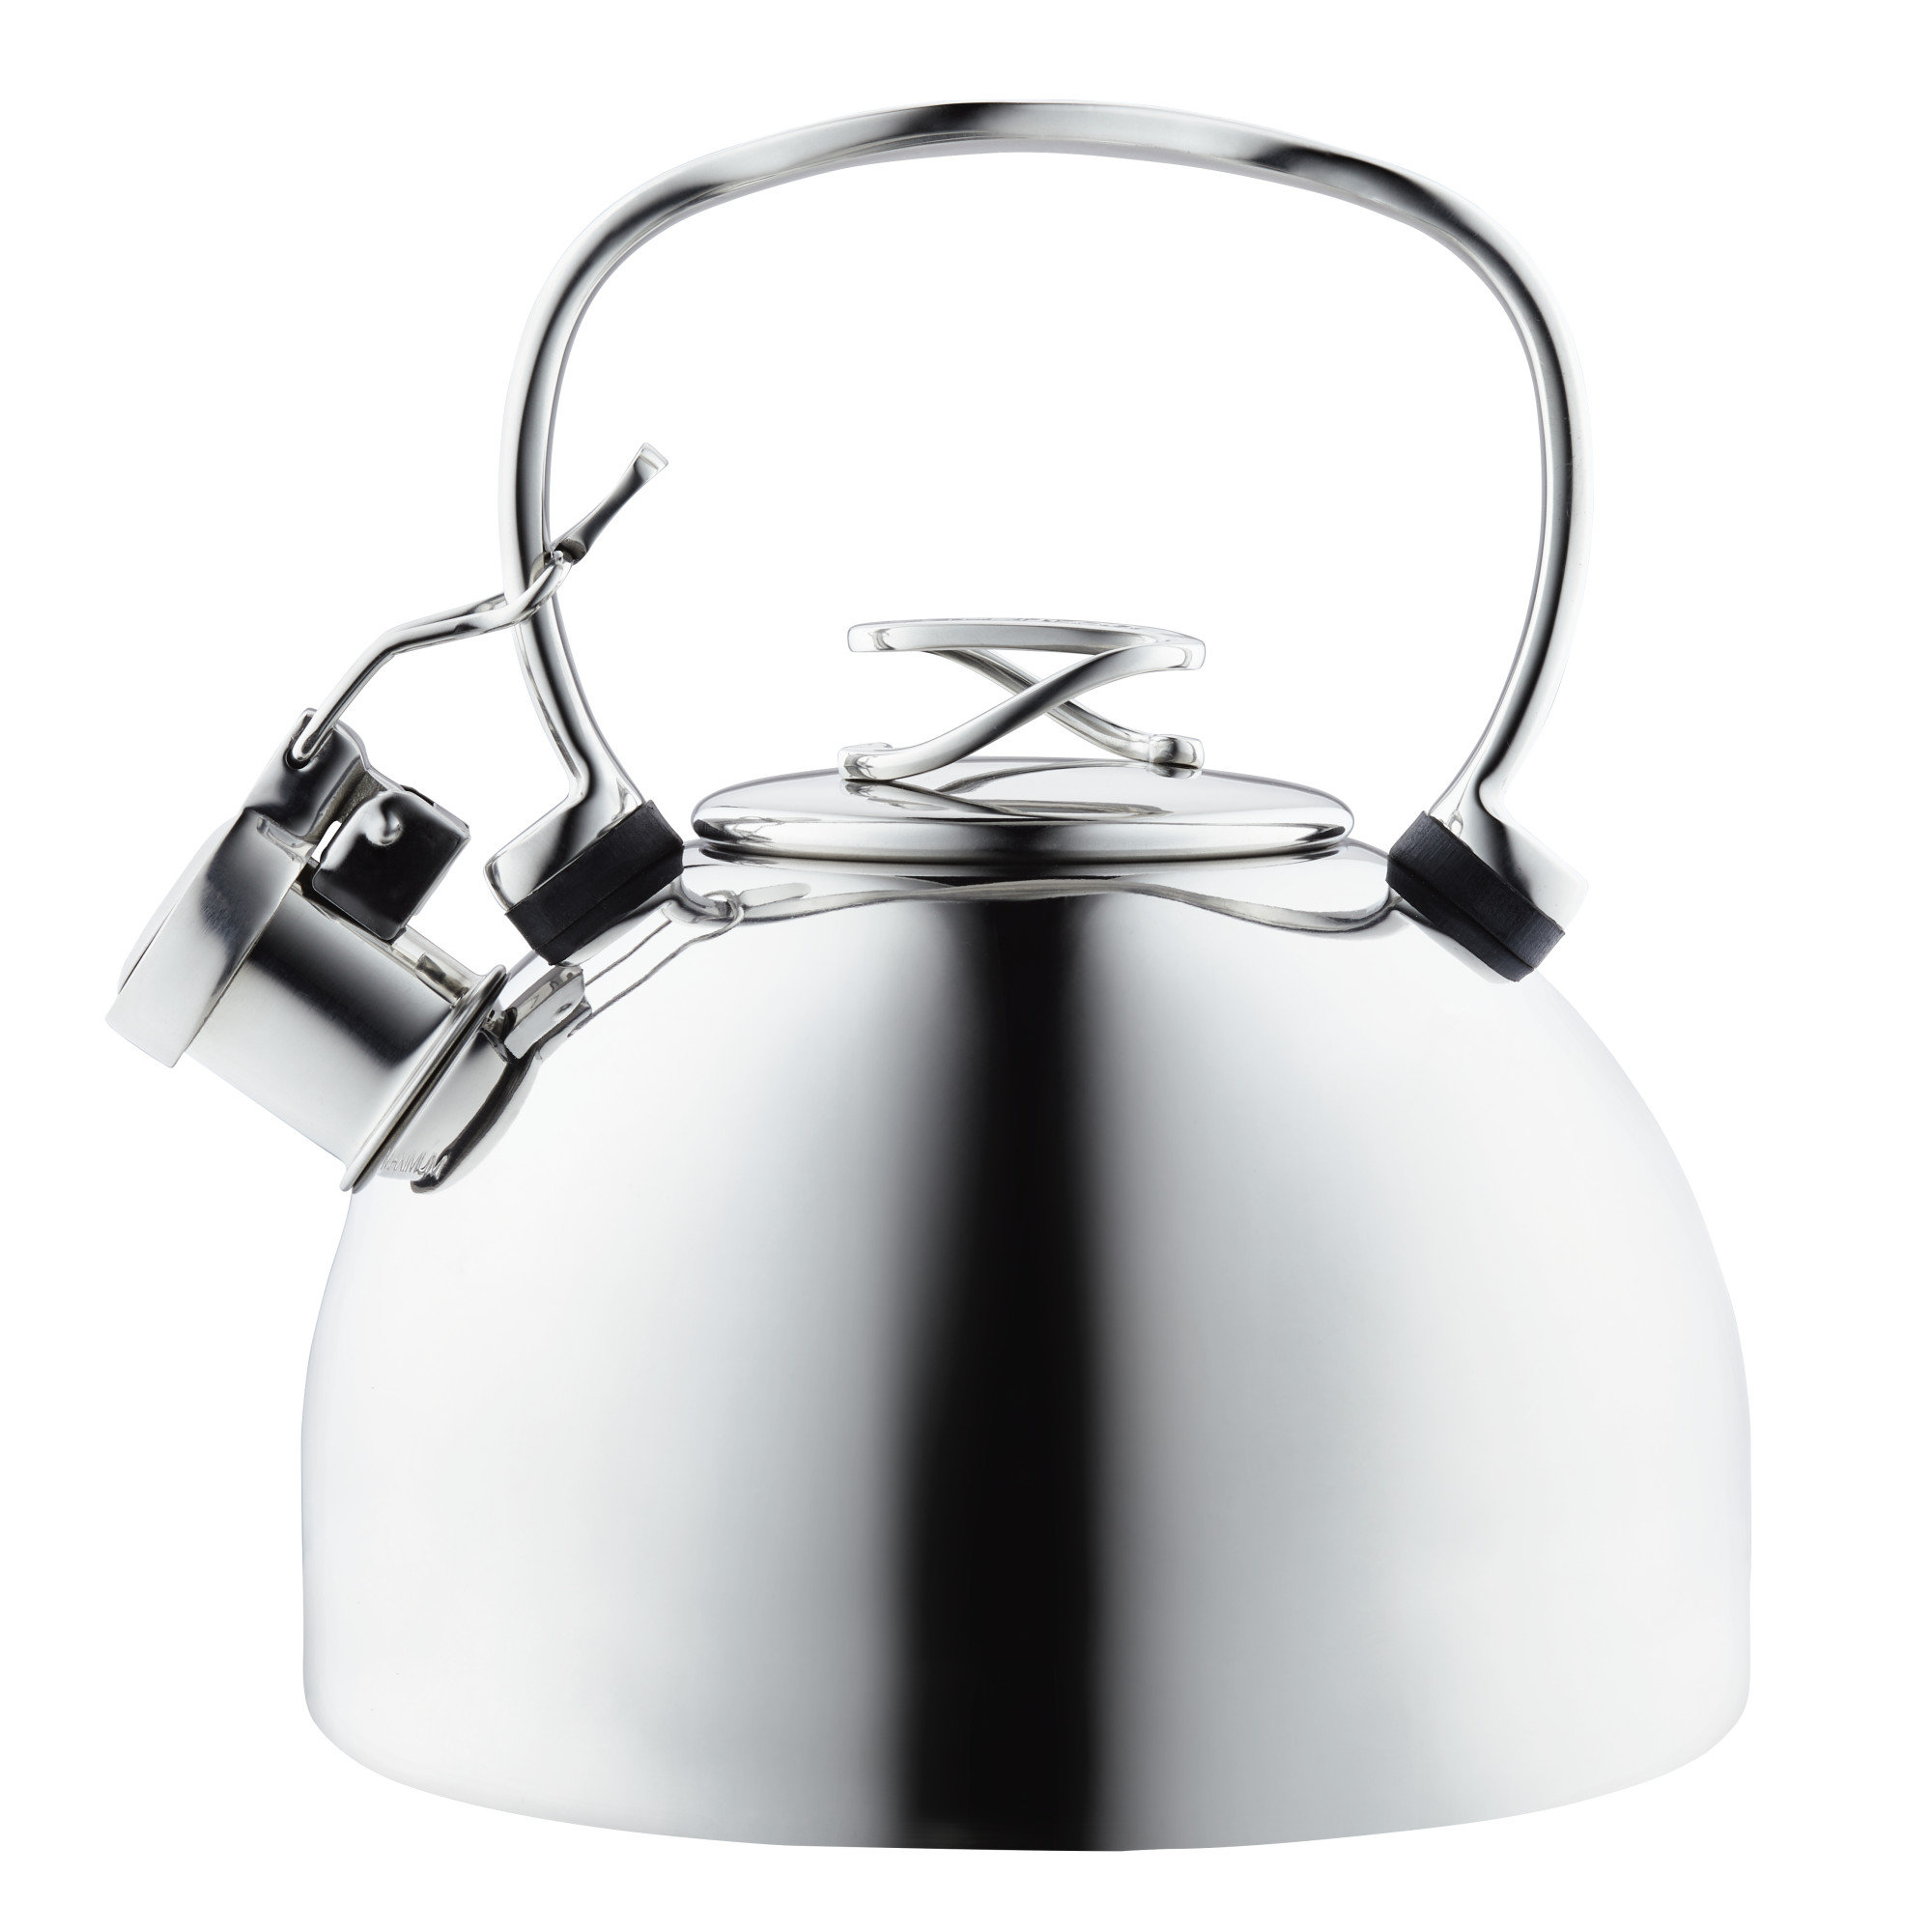 All-Clad E86199 Stainless Steel Tea Kettle, 2-Quart, Silver 